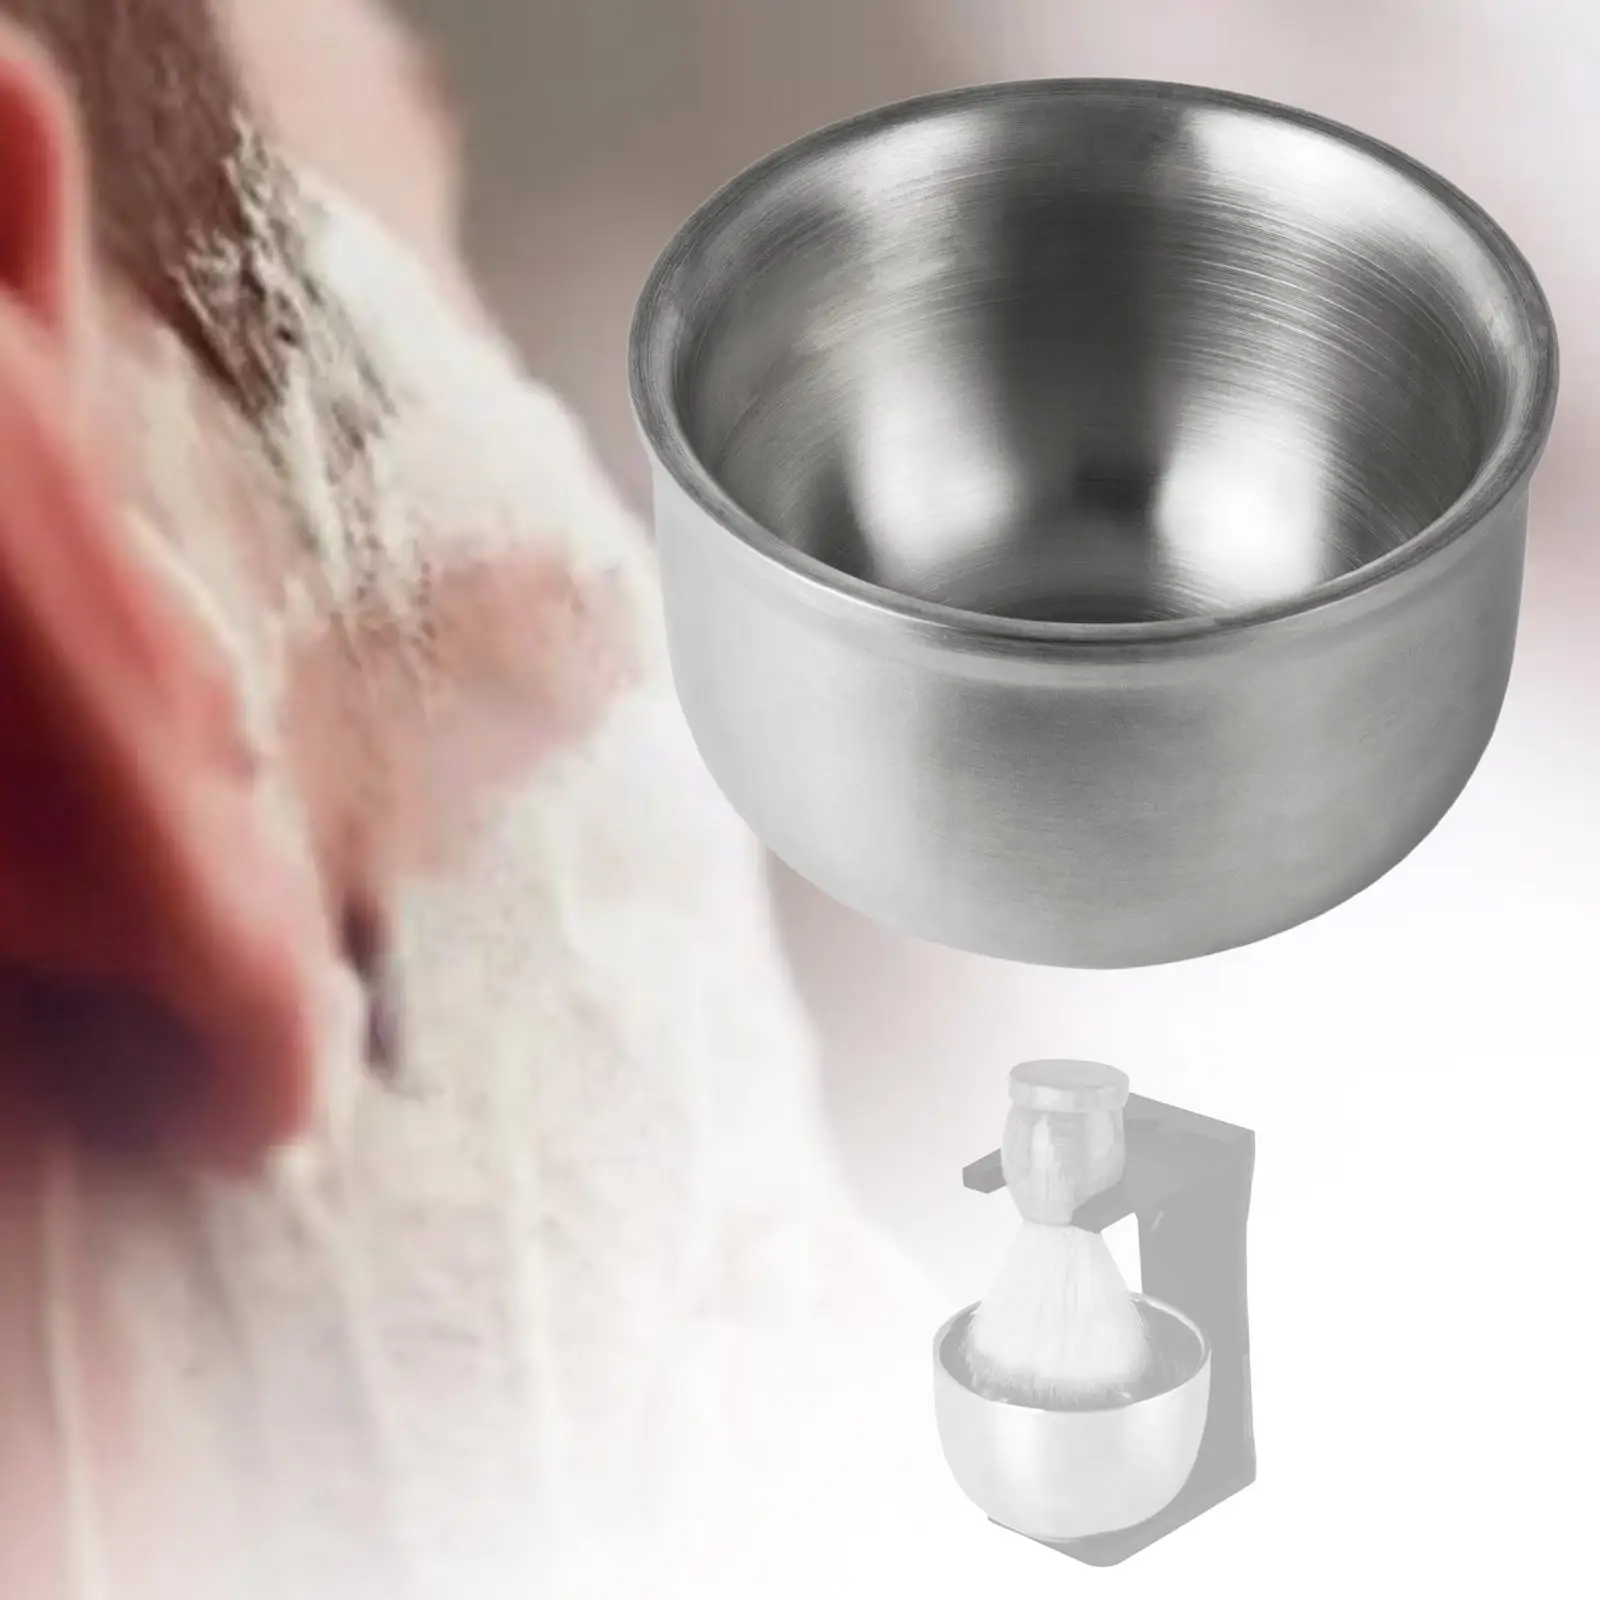 Shaving Soap Bowl Smooth Stainless Steel Keep Warm Better Fits Wet Shave Portable Small Shave Cream and Soap Bowl for Gift Men